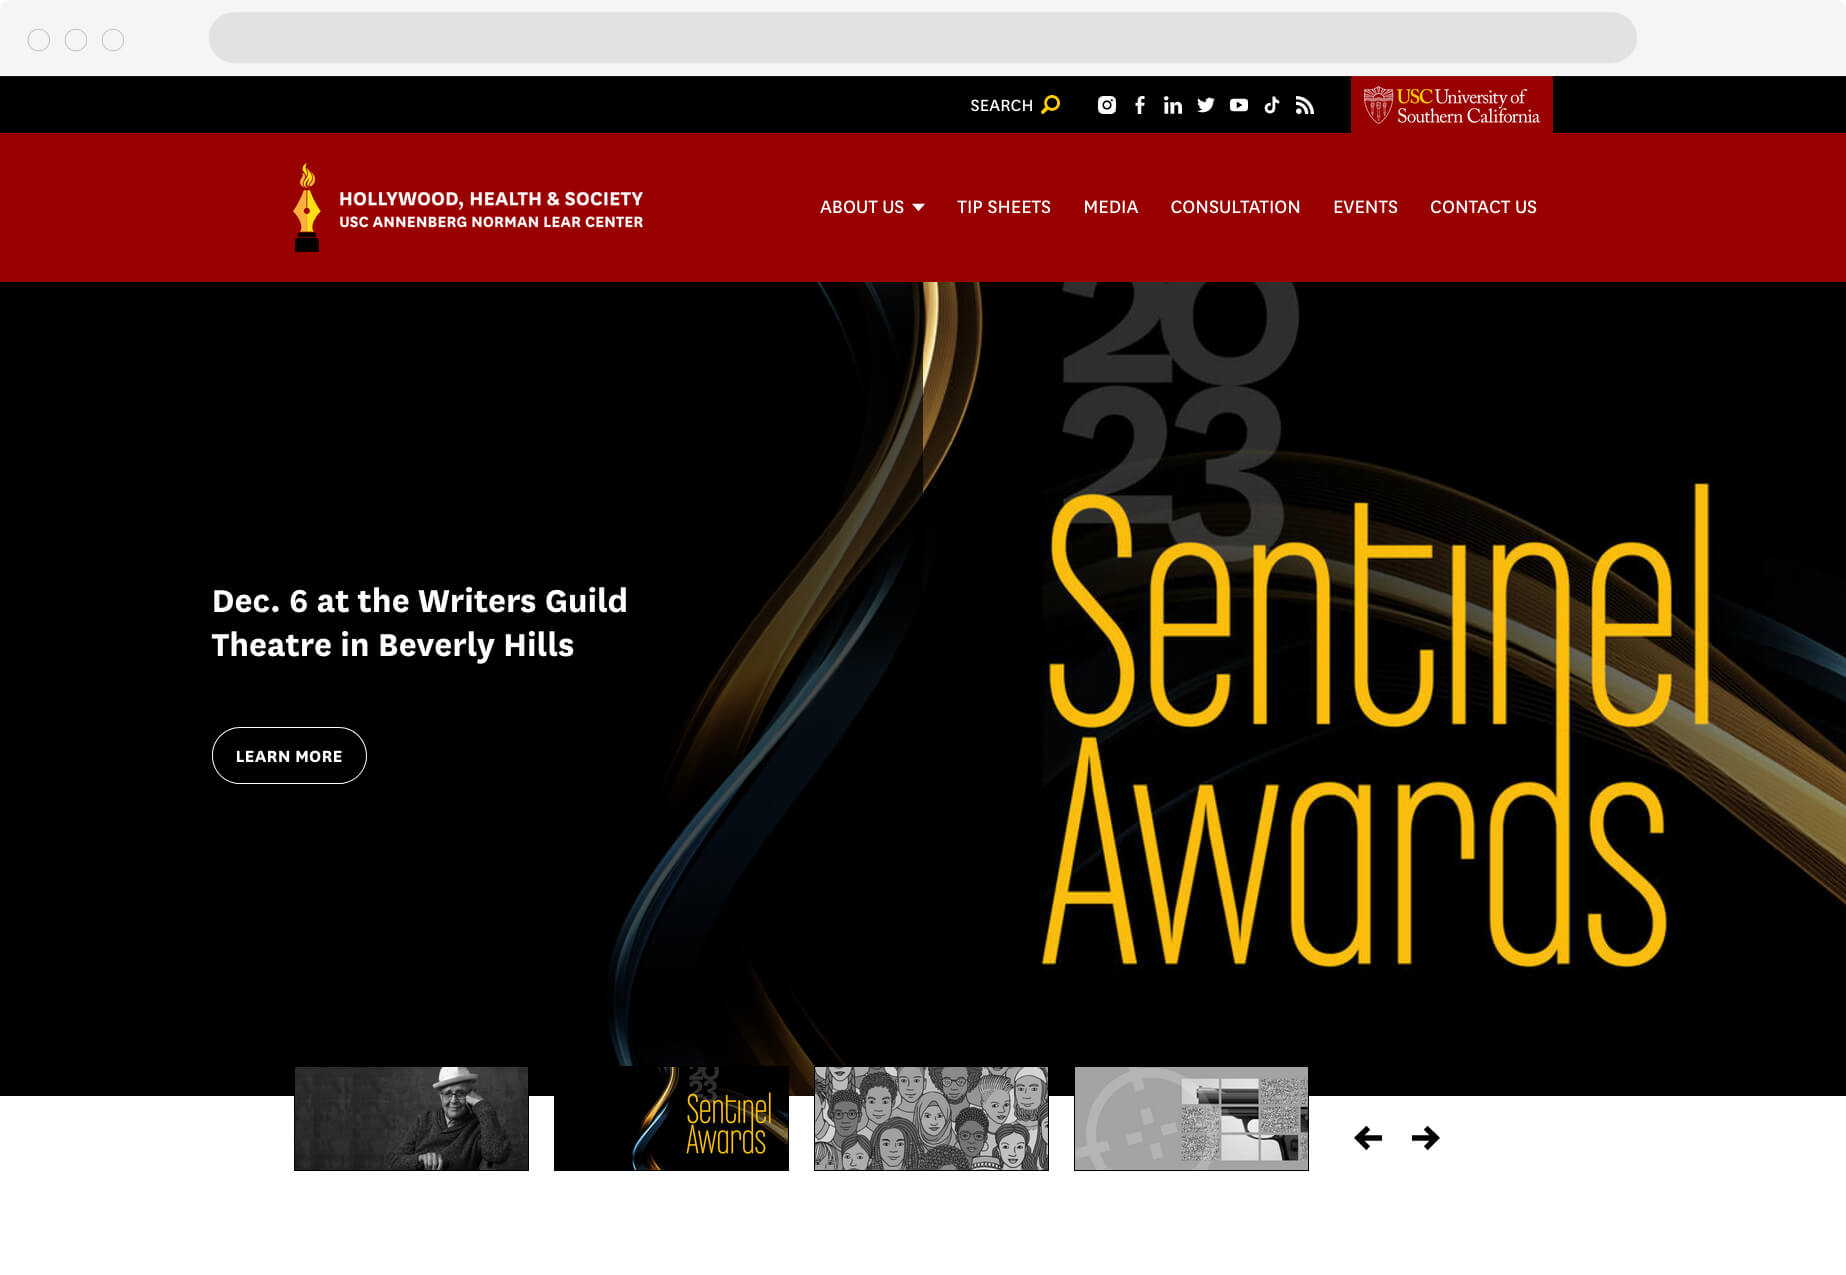 Hollywood Health and Society homepage with clear top navigation and a hero area featuring their Sentinel Awards annual event.